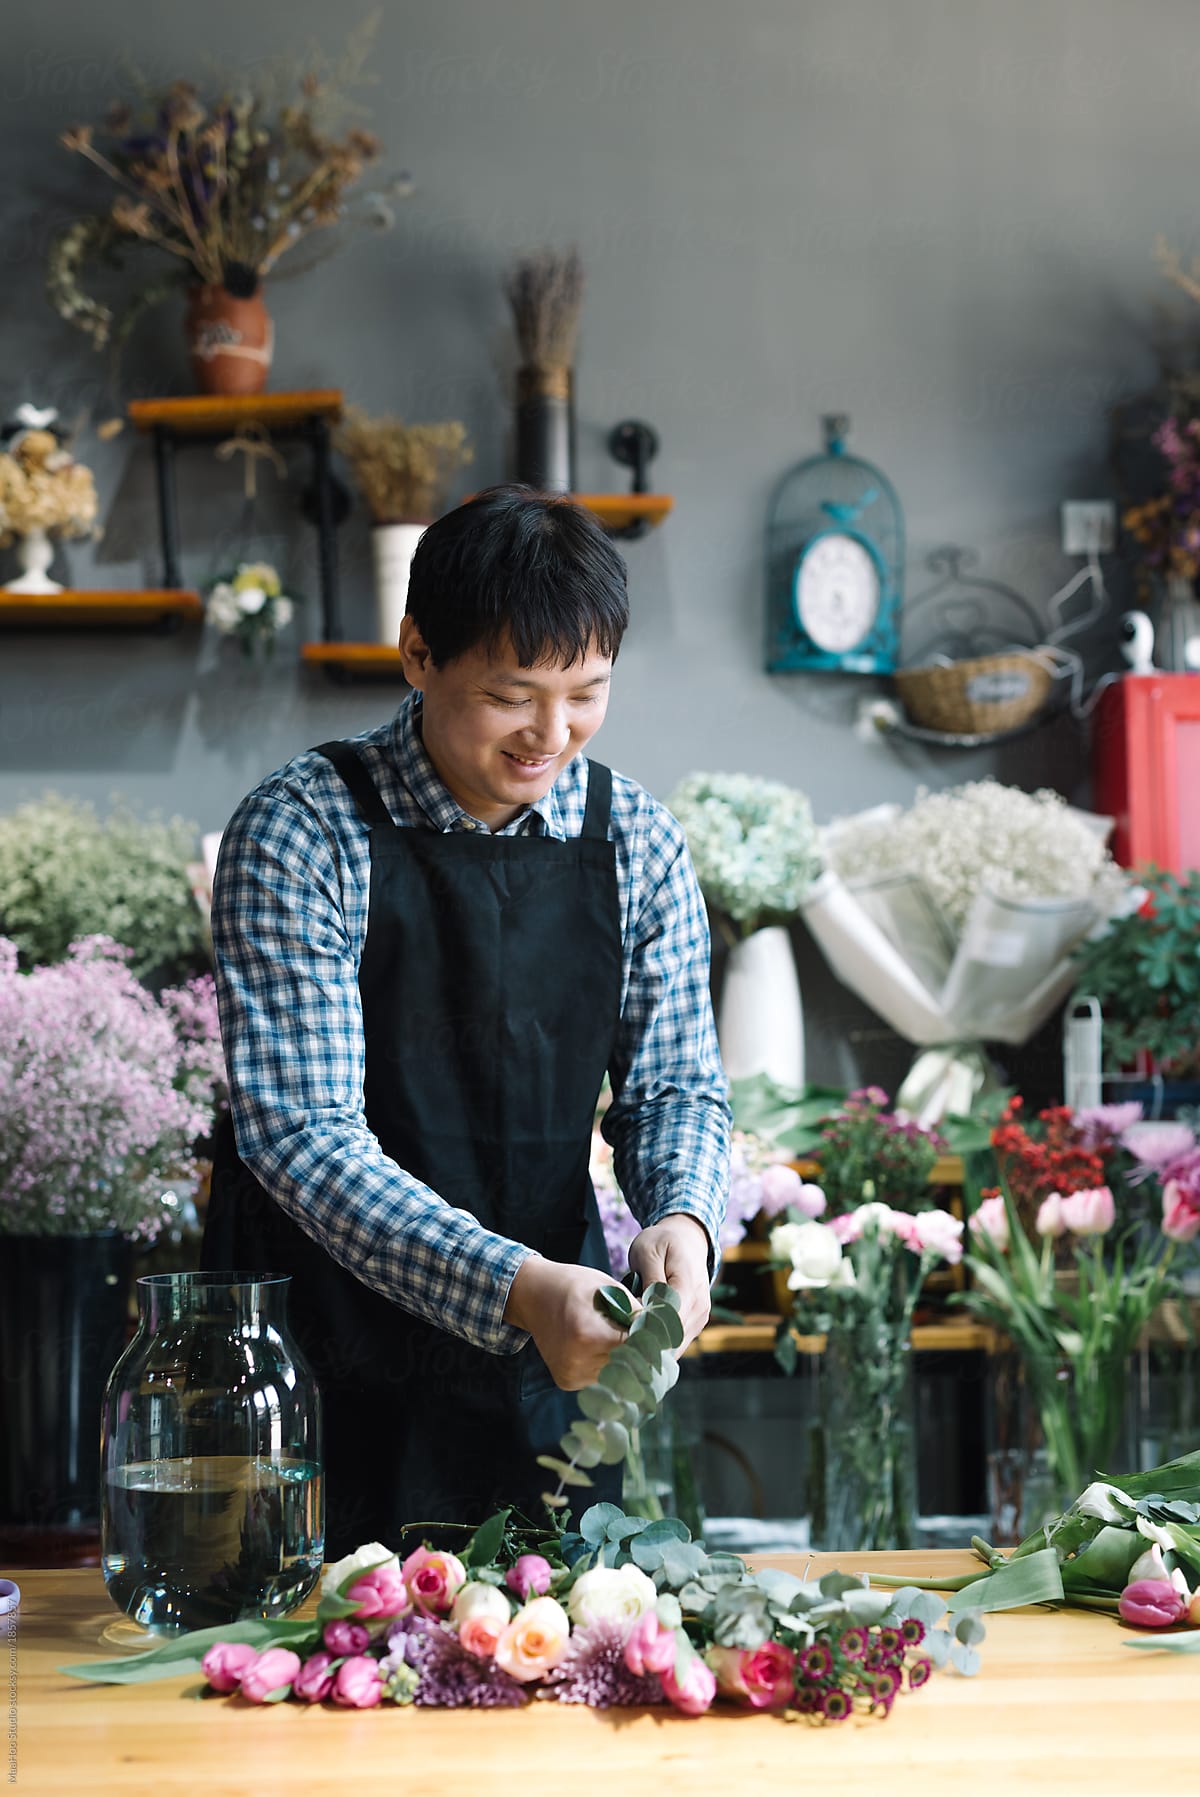 Floral shop owner working in the flower shop